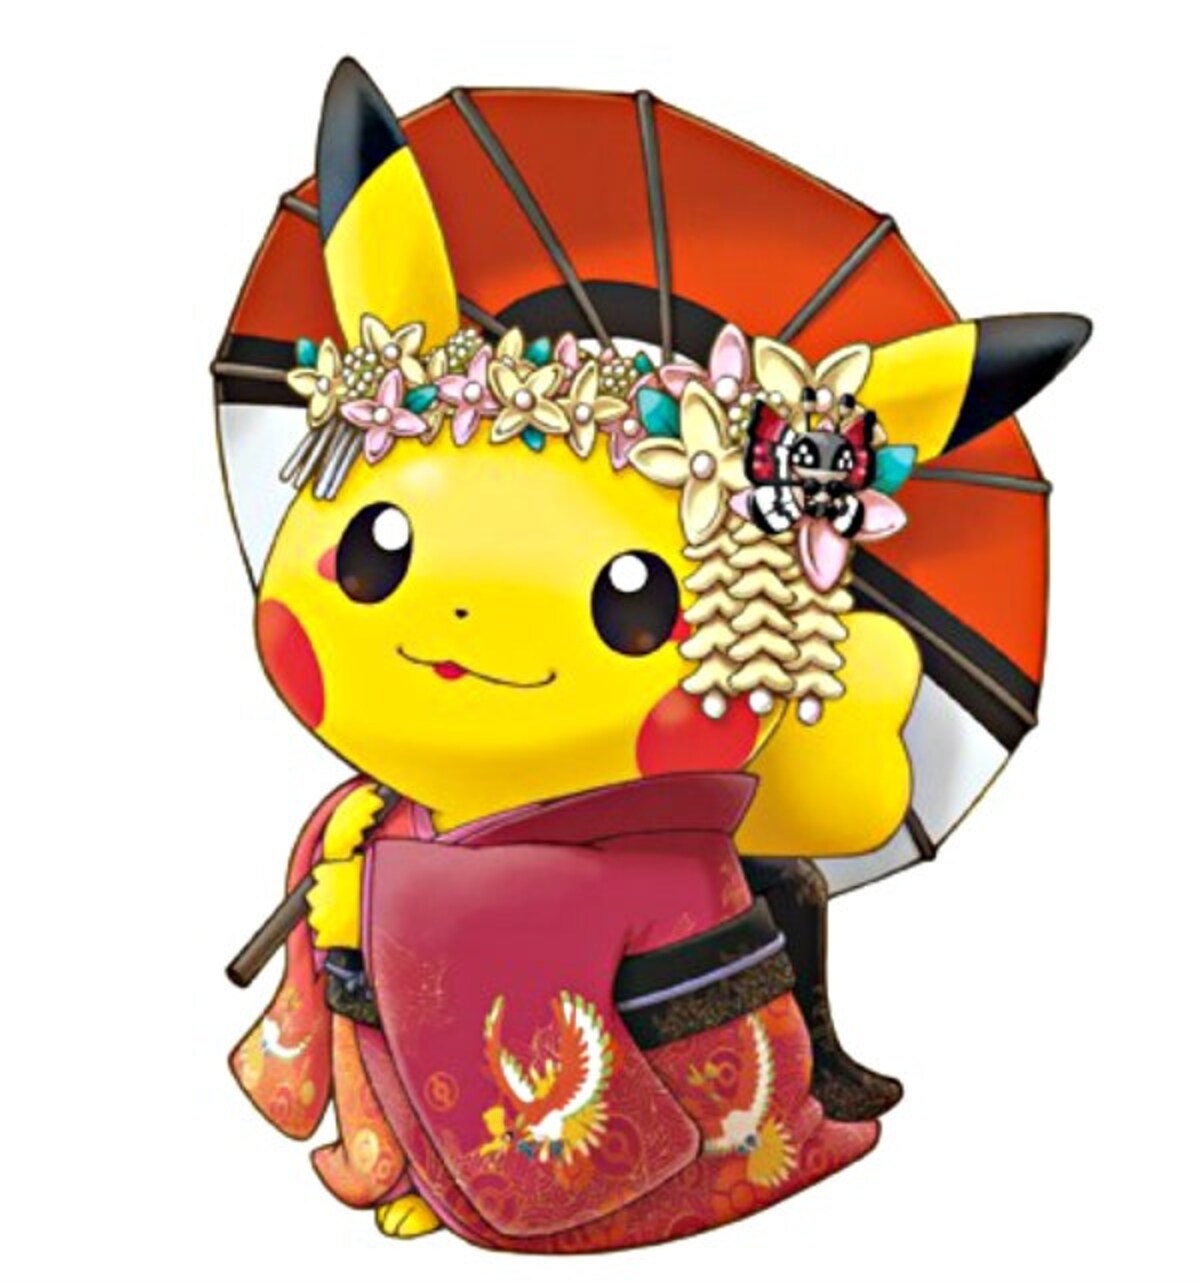 Pokémon Center Kyoto Prepares Exclusive Merch for Grand Opening - Interest  - Anime News Network